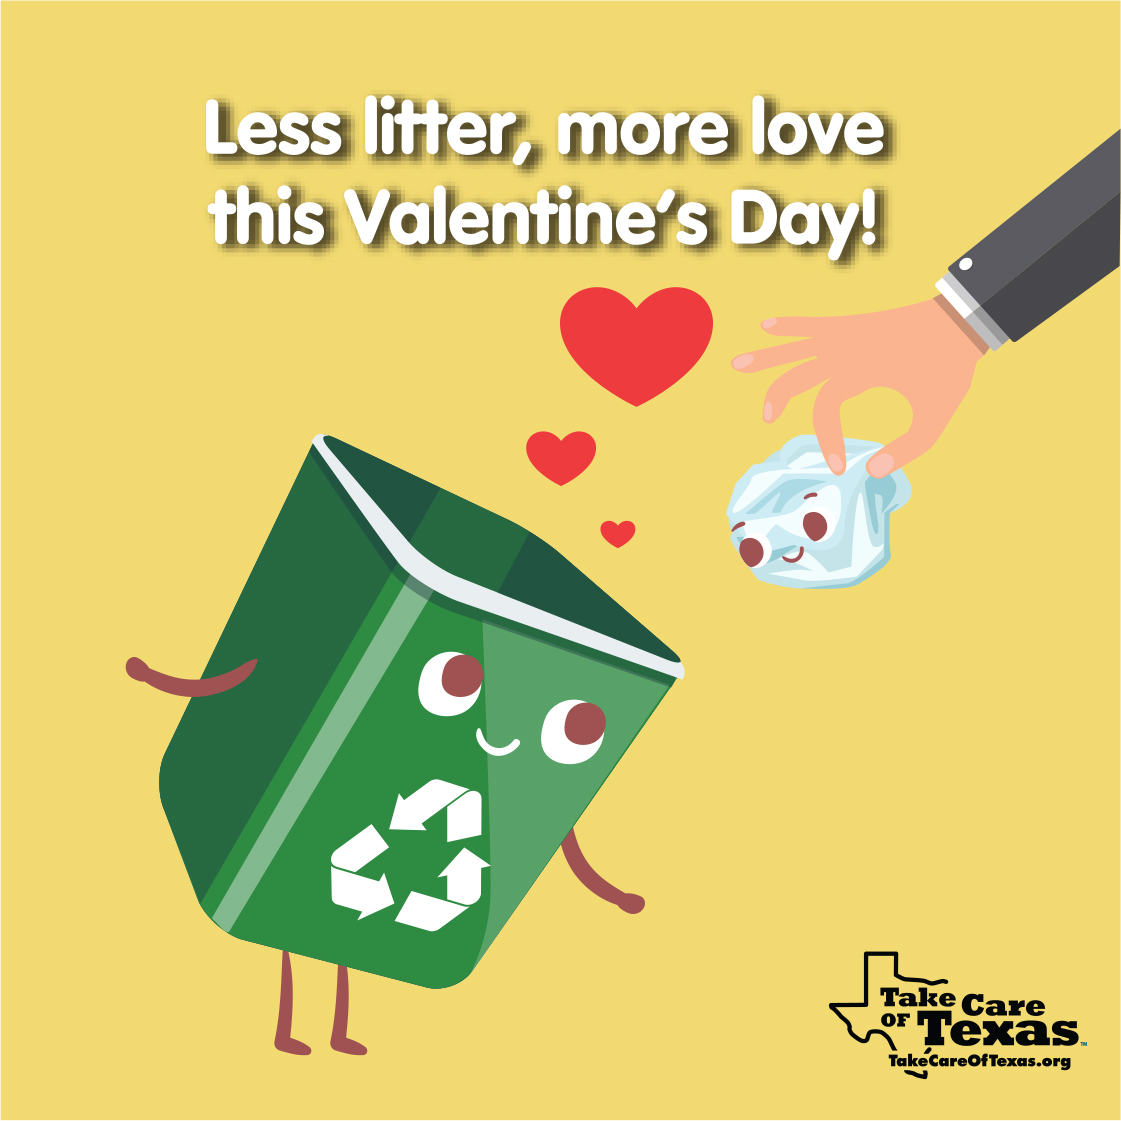 Recycling bin with the text "Less litter, more love this Valentine's Day!"